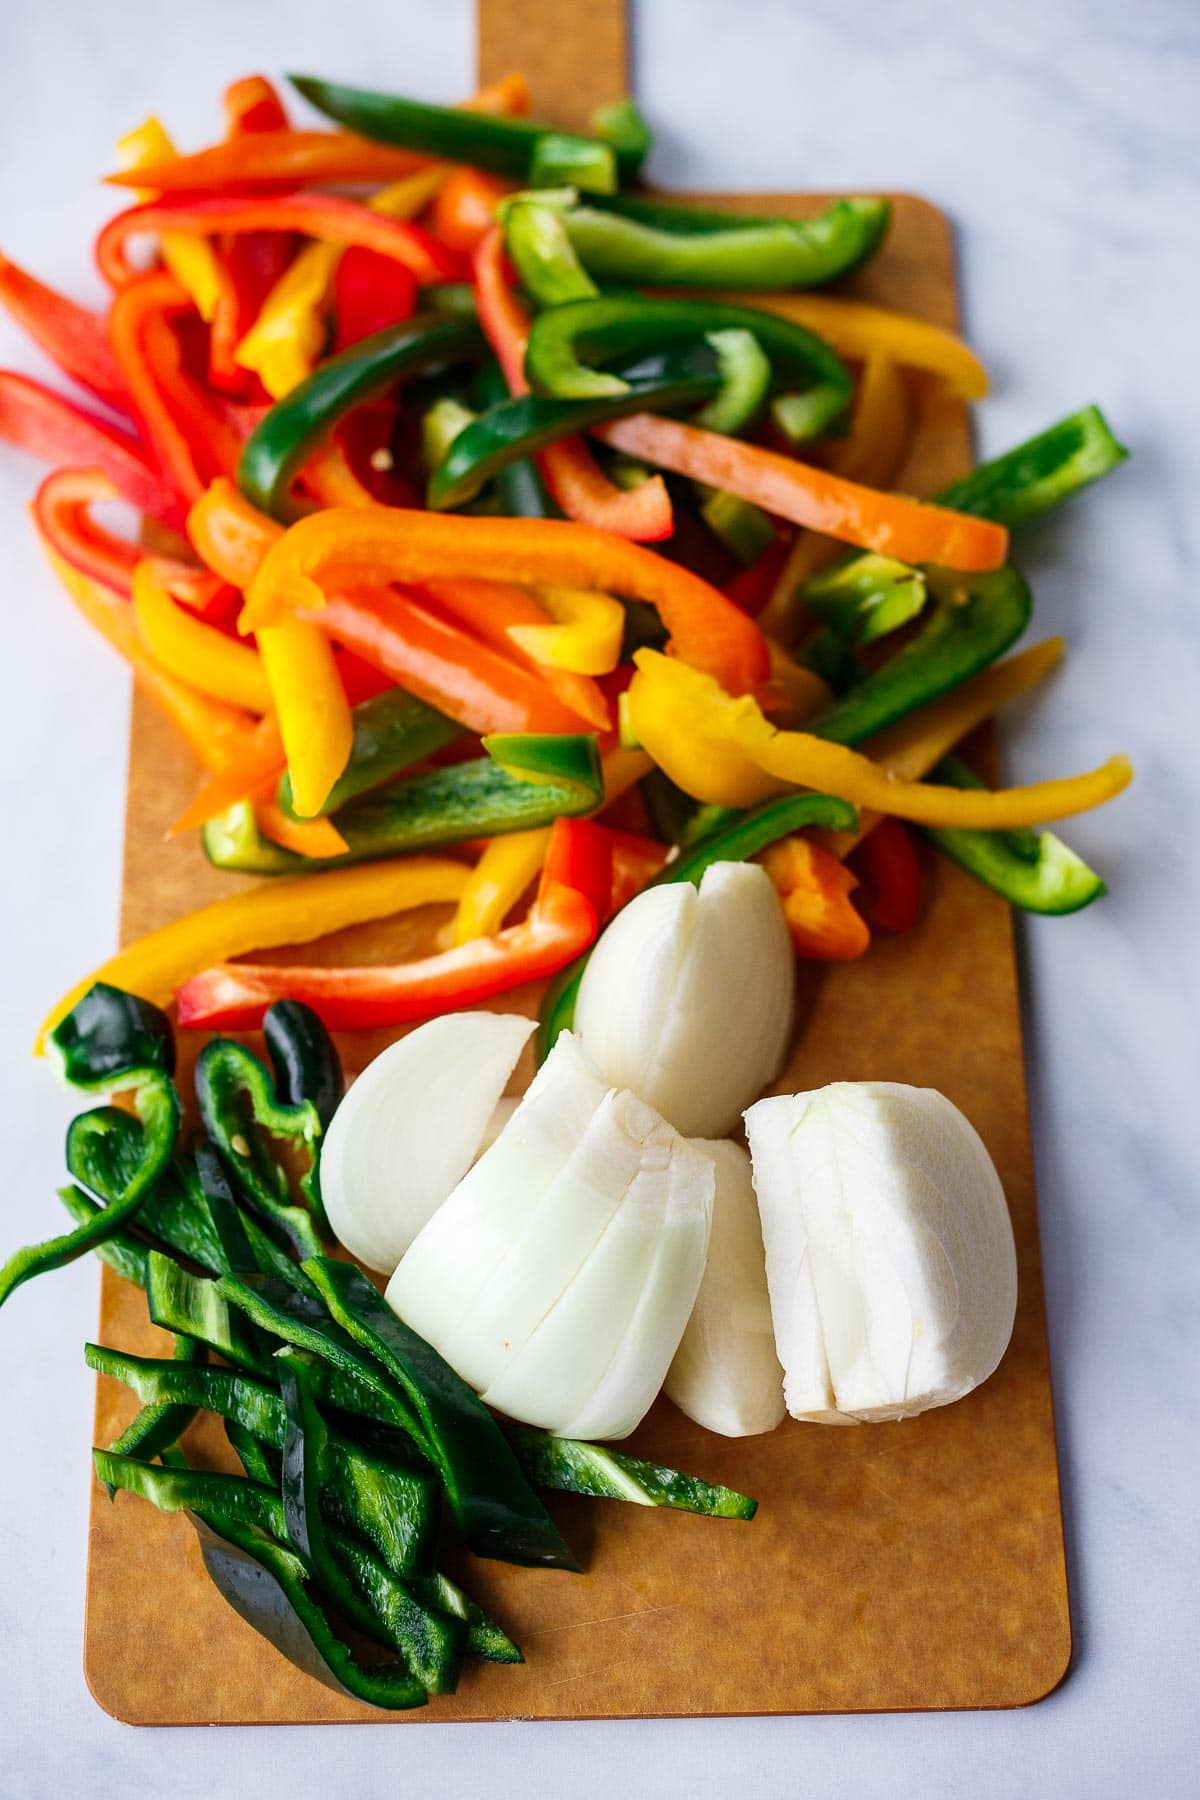 Cut the peppers and onions into strips.